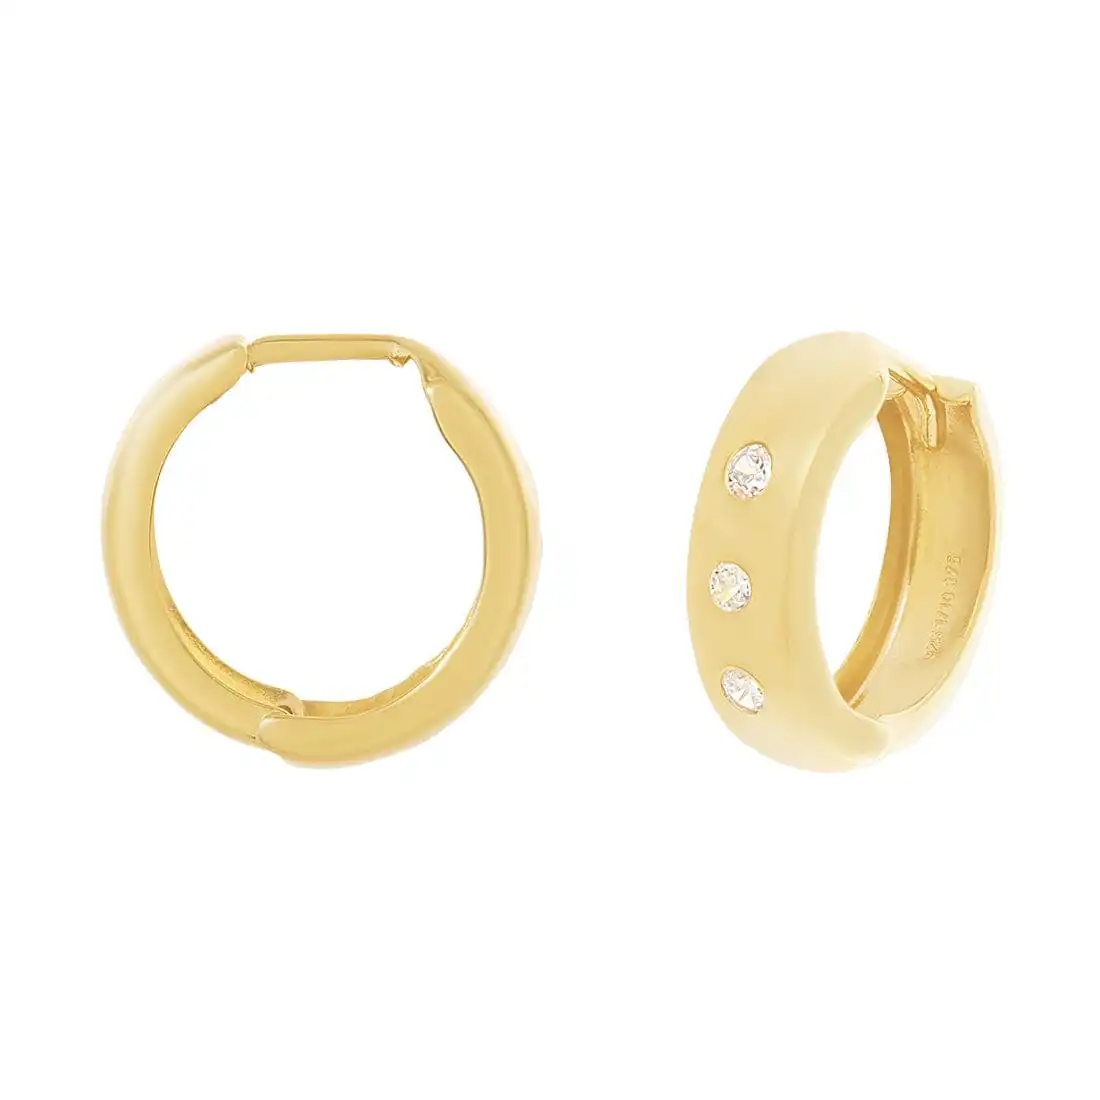 9ct Yellow Gold Silver Infused Huggies Earrings with Cubic Zirconia